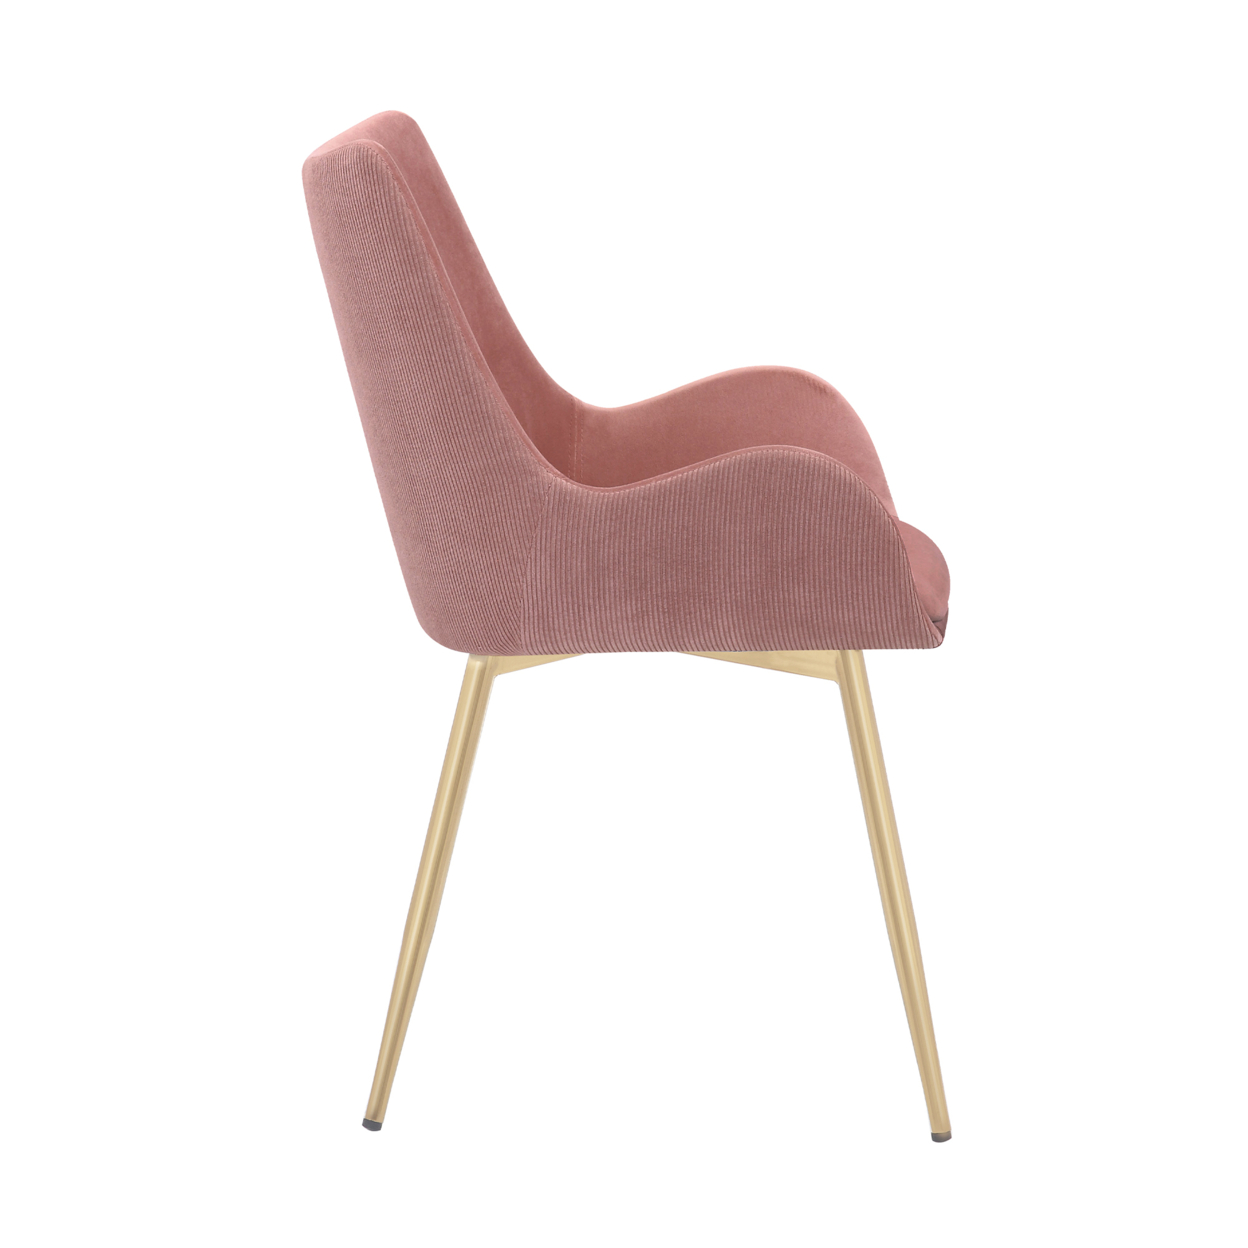 22 Inch Fabric Upholstered Dining Side Chair, Sloped Arms, Metal Legs, Pink- Saltoro Sherpi